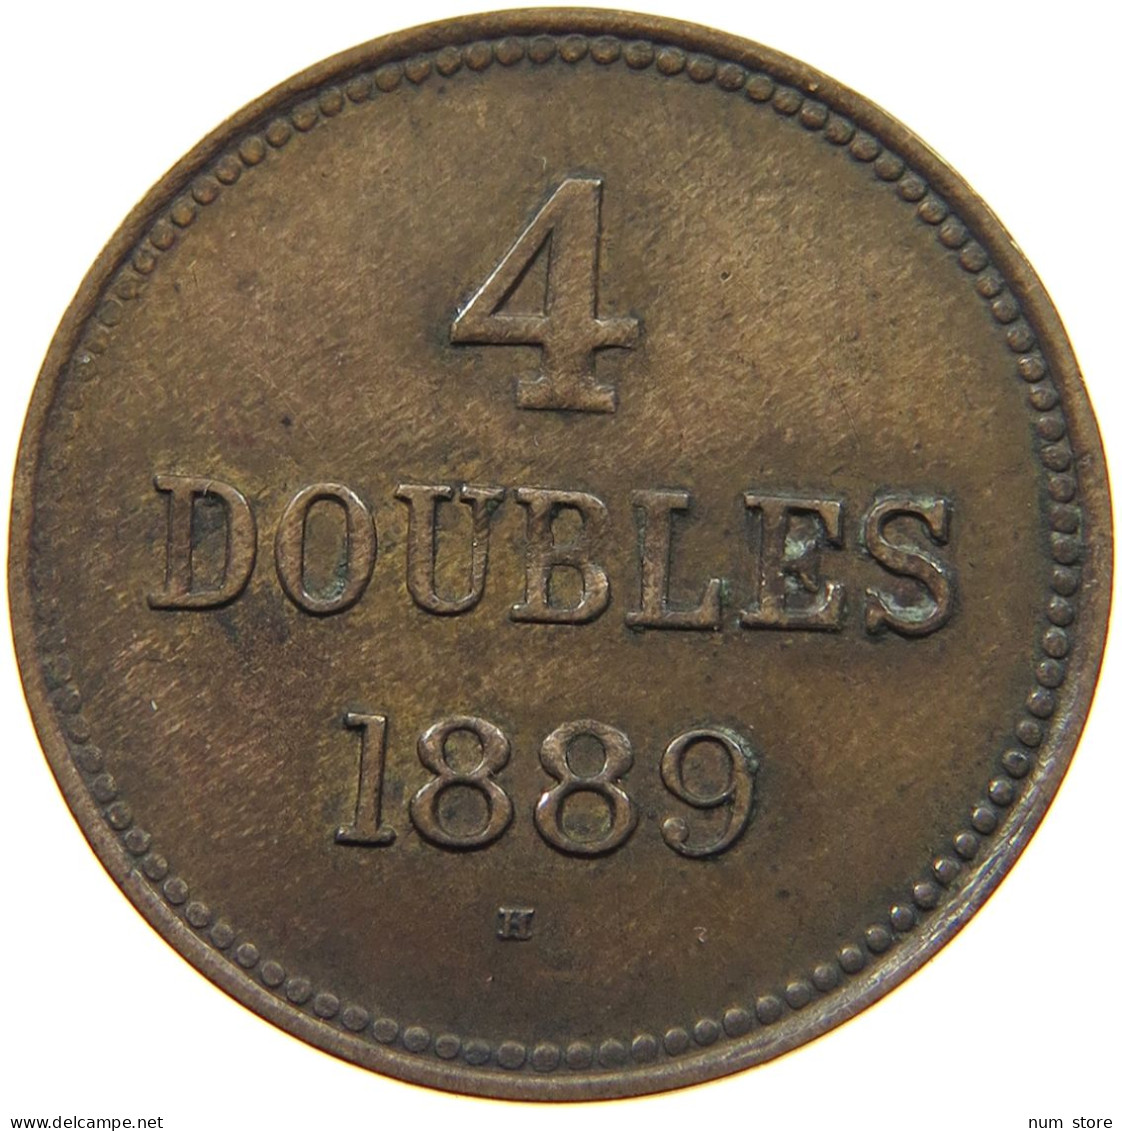 GUERNSEY 4 DOUBLES 1889 VICTORIA (1837-1901) #MA 001700 - Guernesey